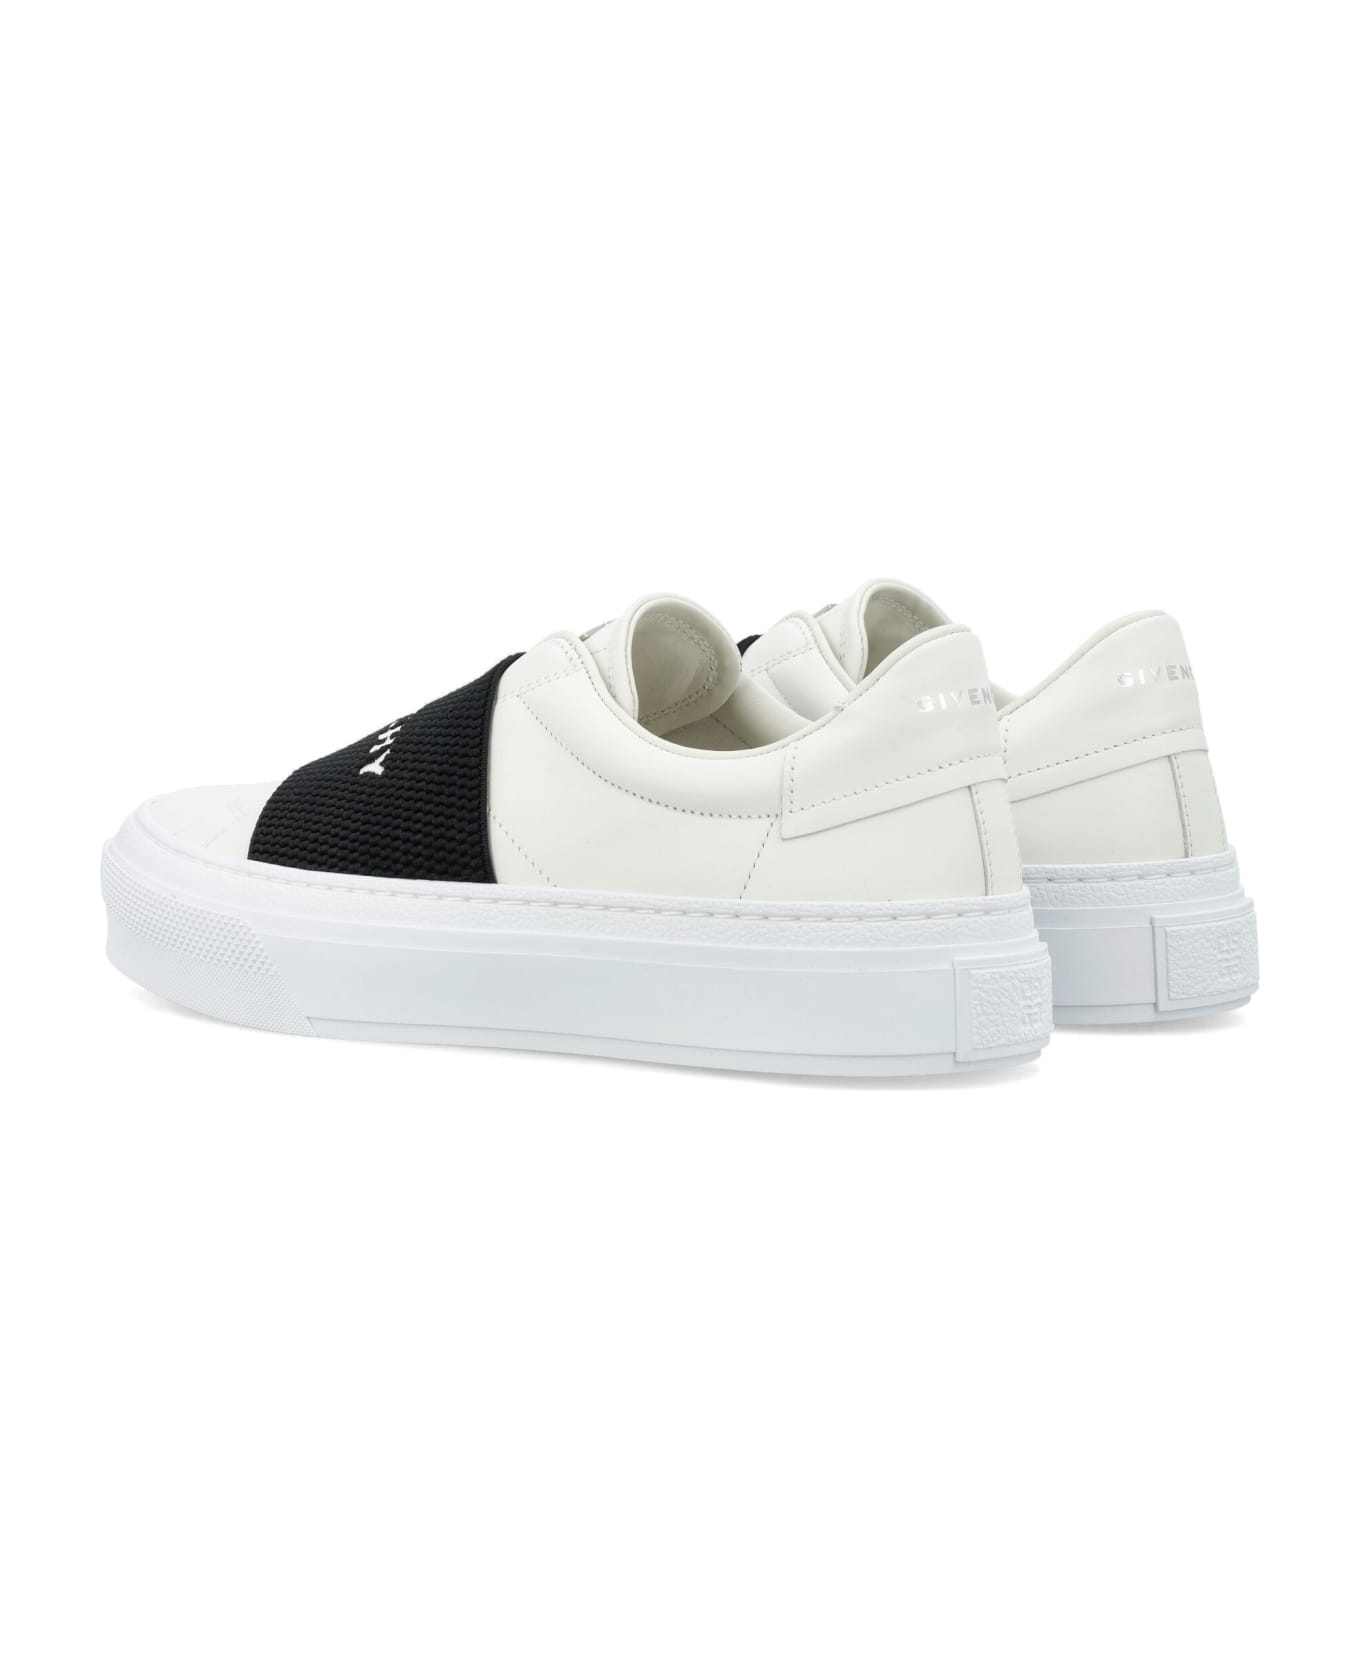 Givenchy City Sport Elastic Sneakers - WHITE/BLACK